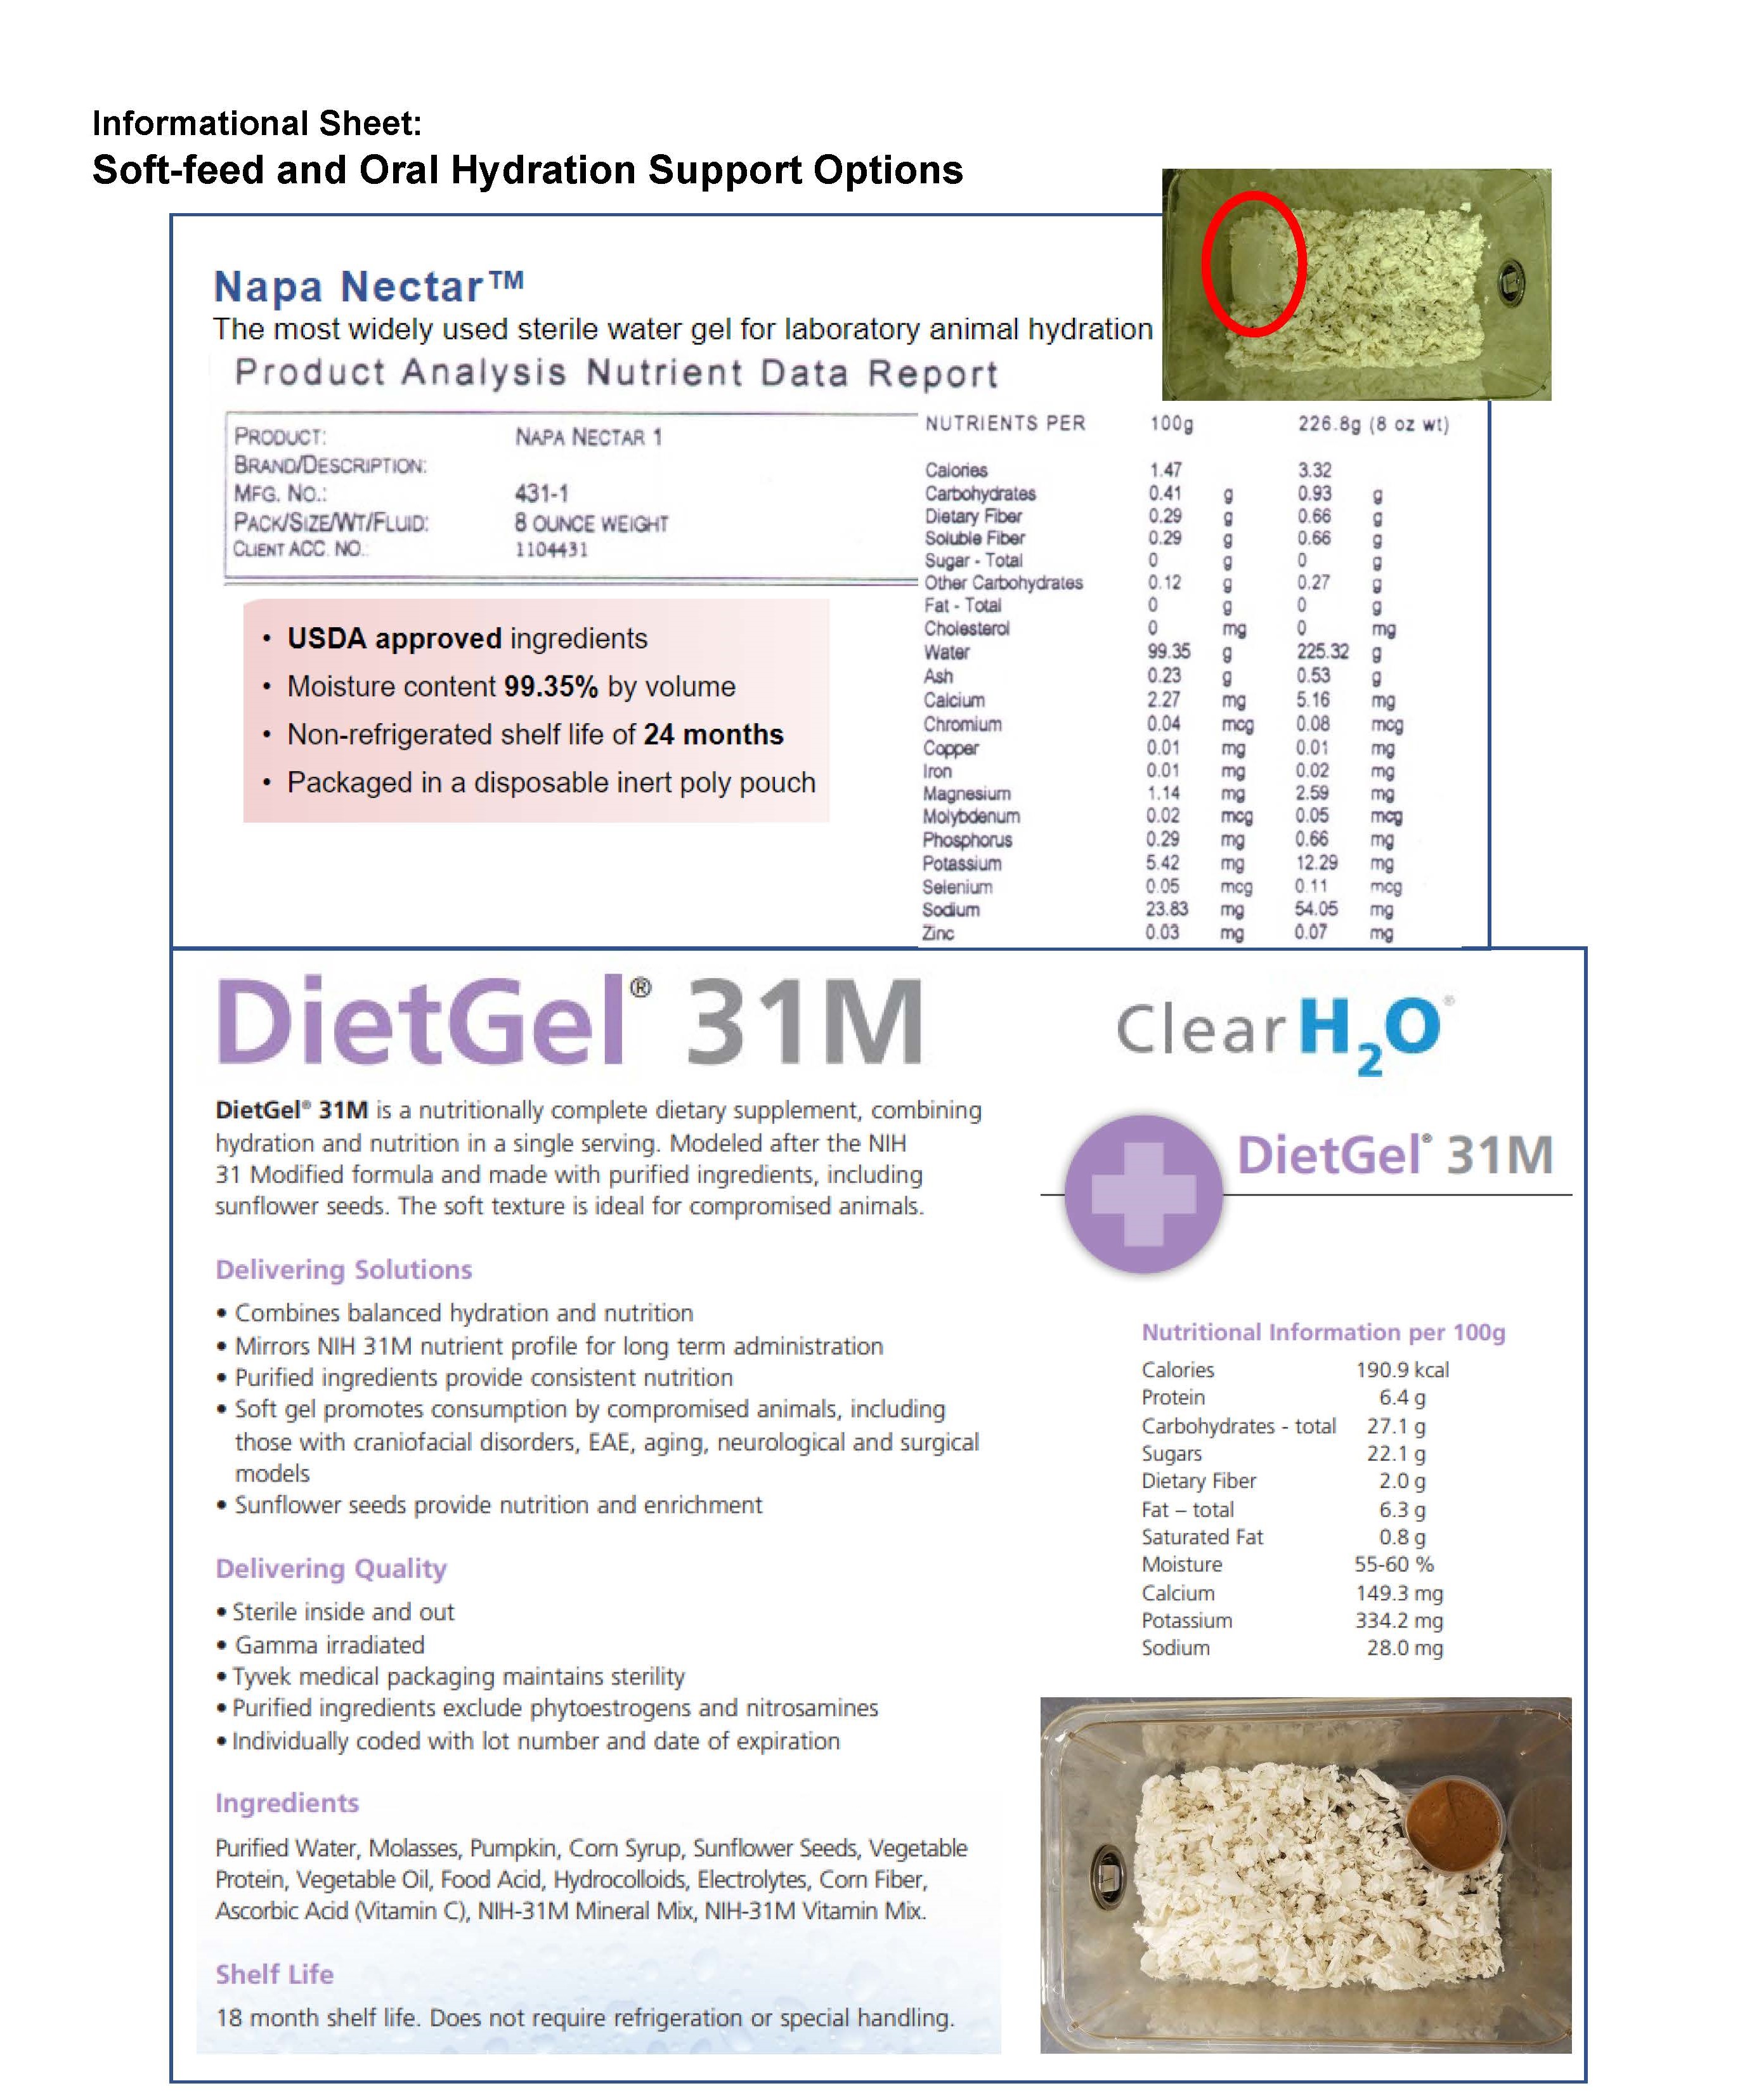 Napa Nectar and DietGel soft feed and oral hydration data sheet